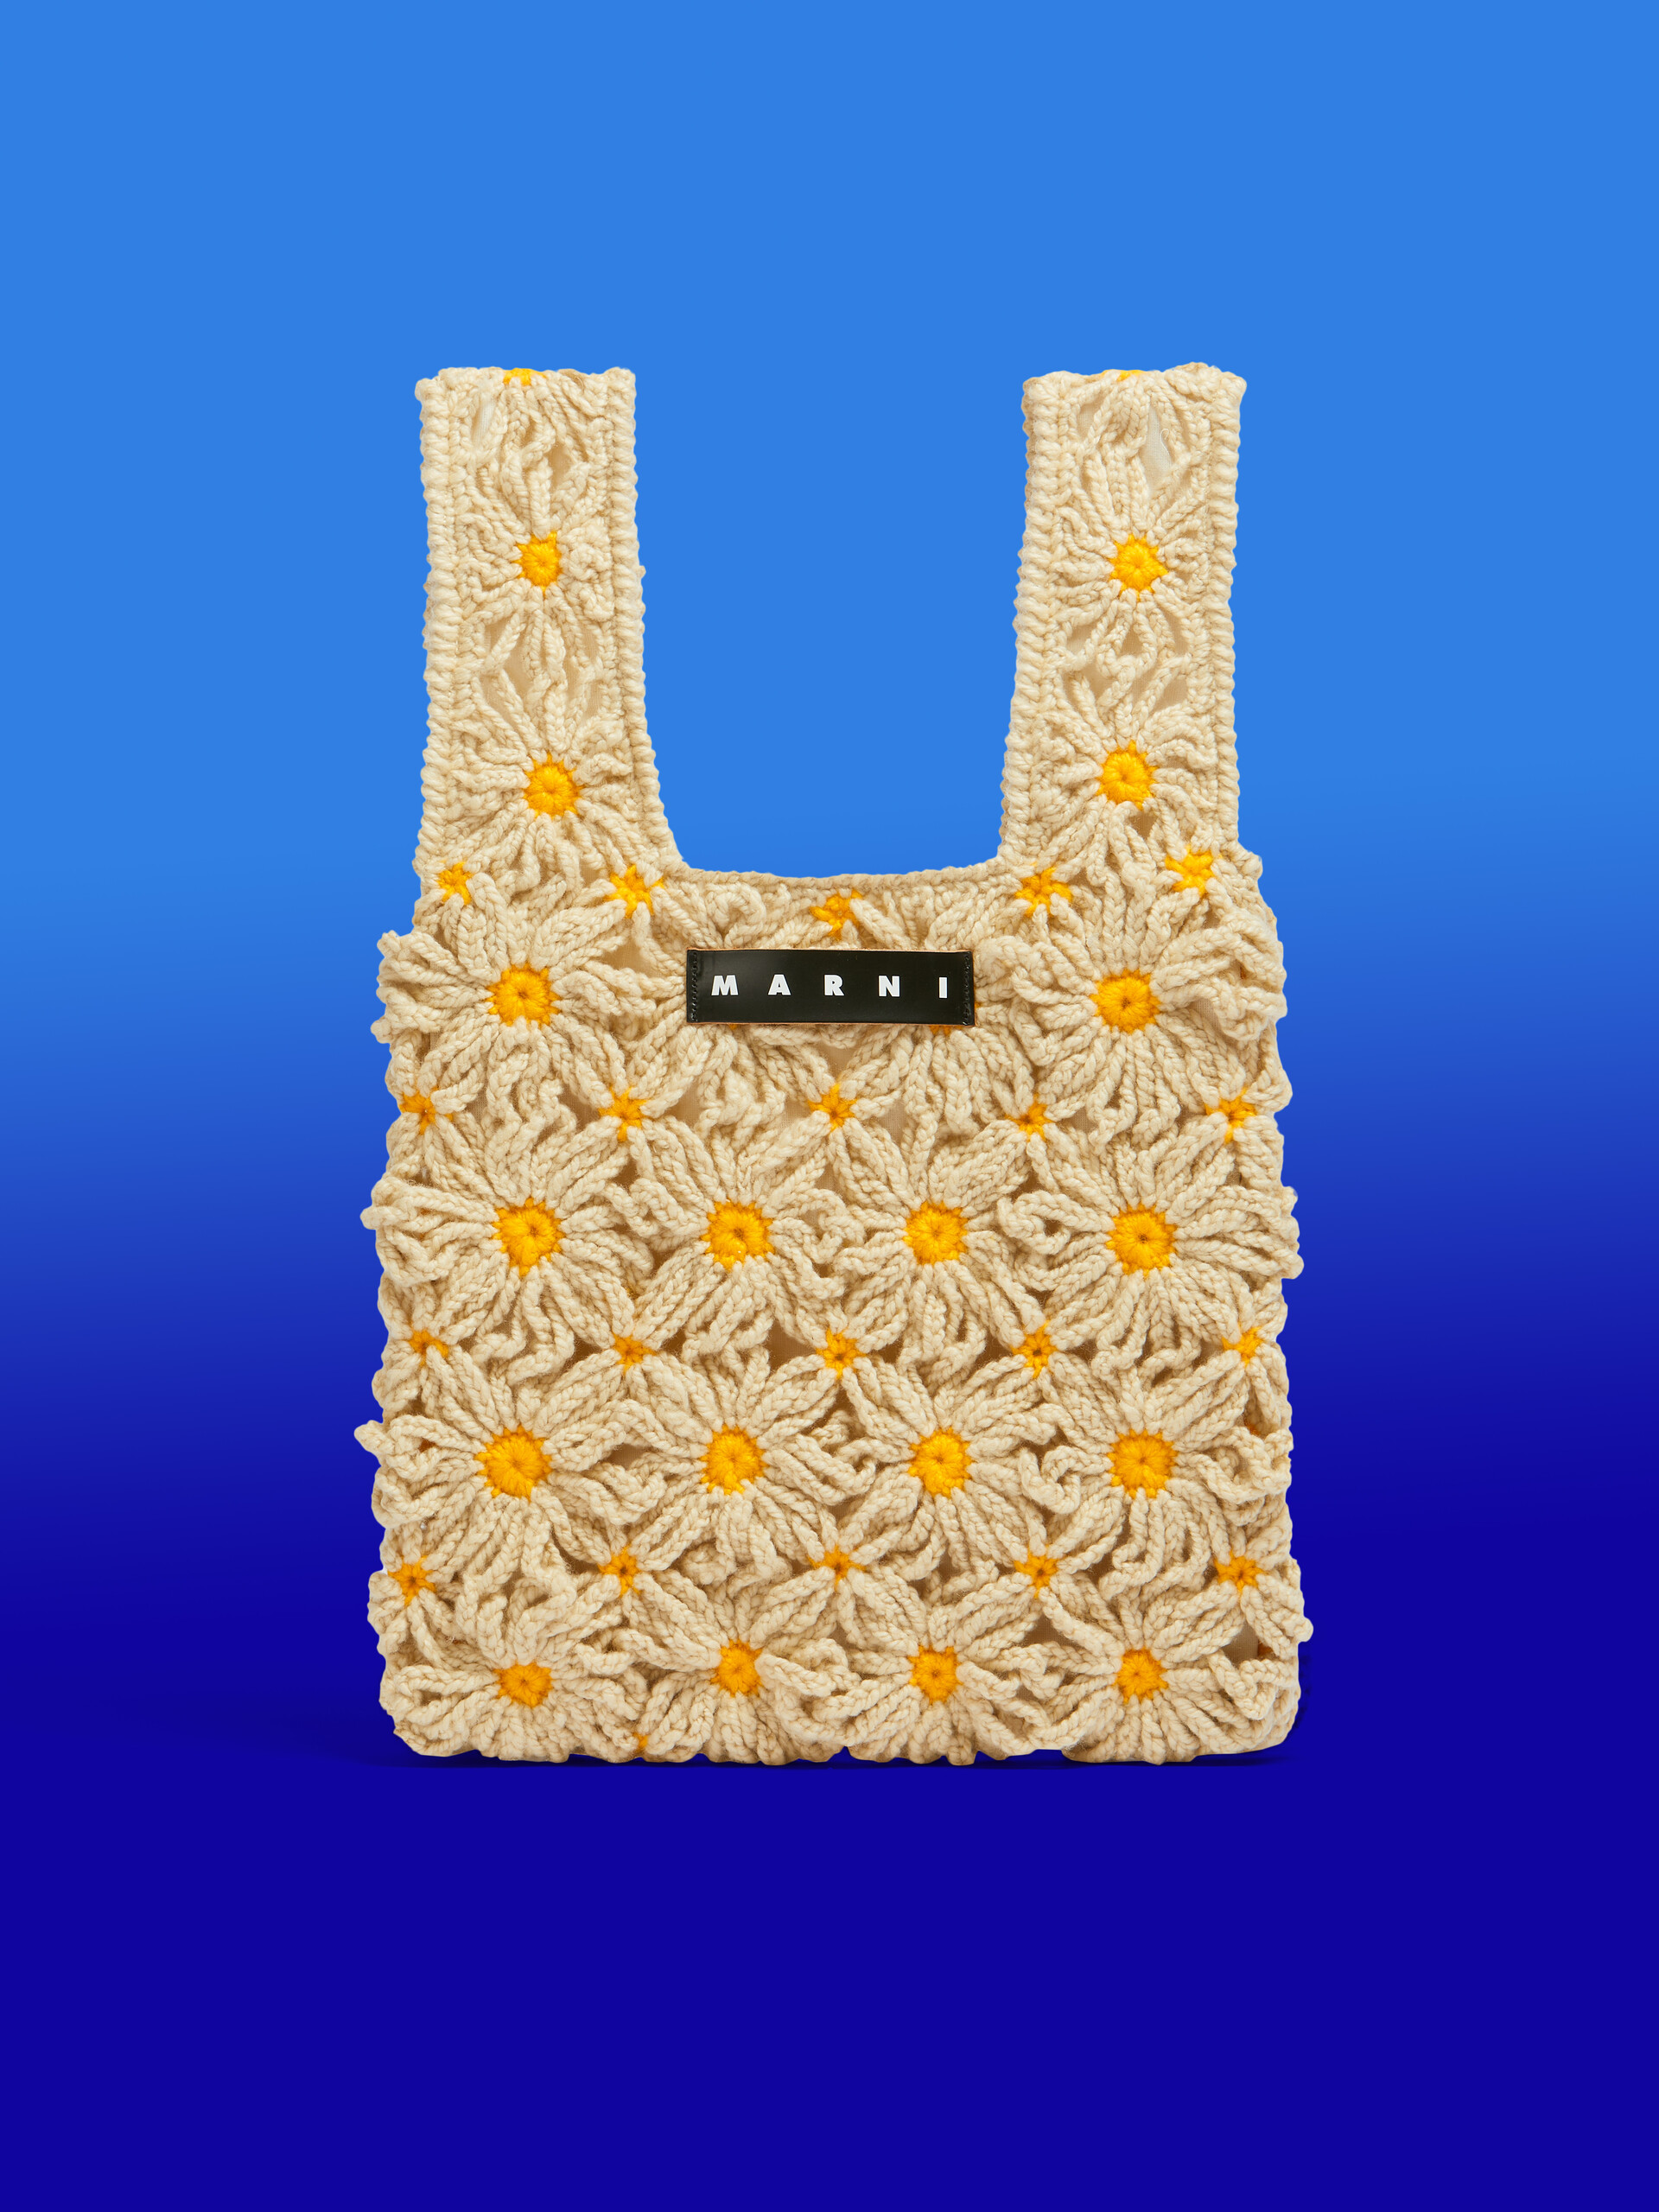 MARNI MARKET FISH bag in white and blue crochet - Bags - Image 1